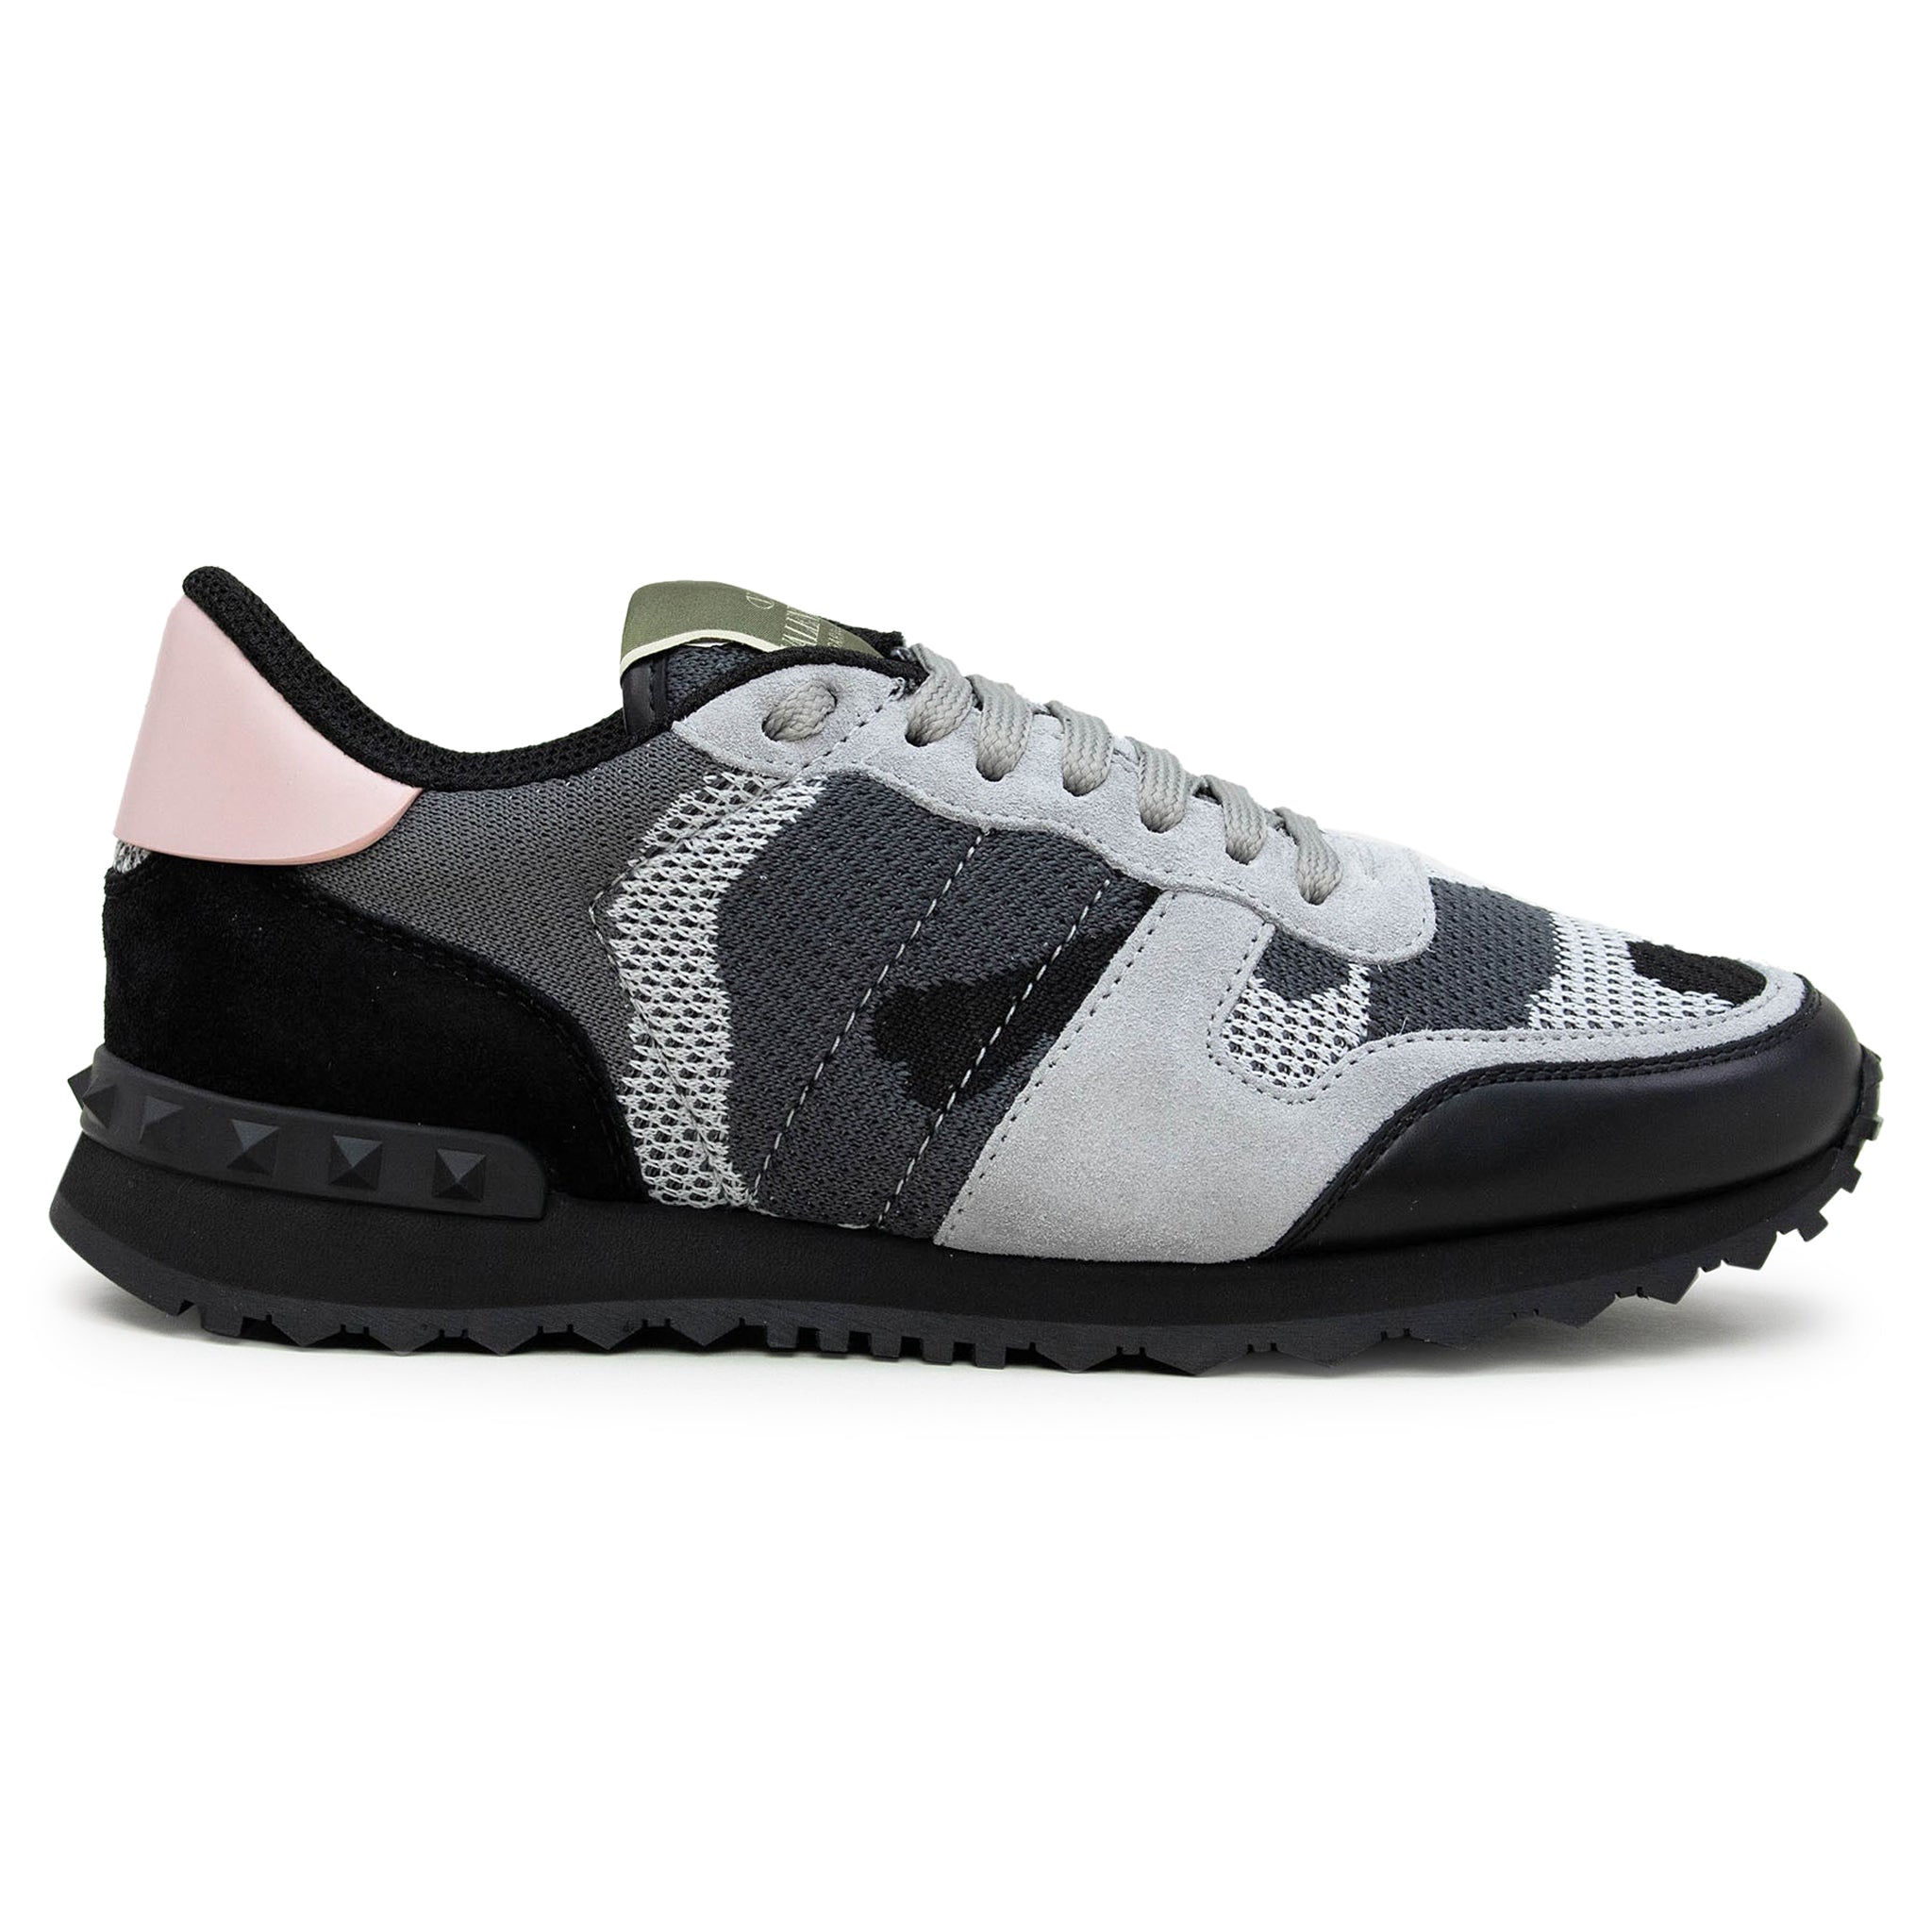 Image of Trapeze valentino Rockrunner Camouflage Grey Black Pink Mesh Sneaker